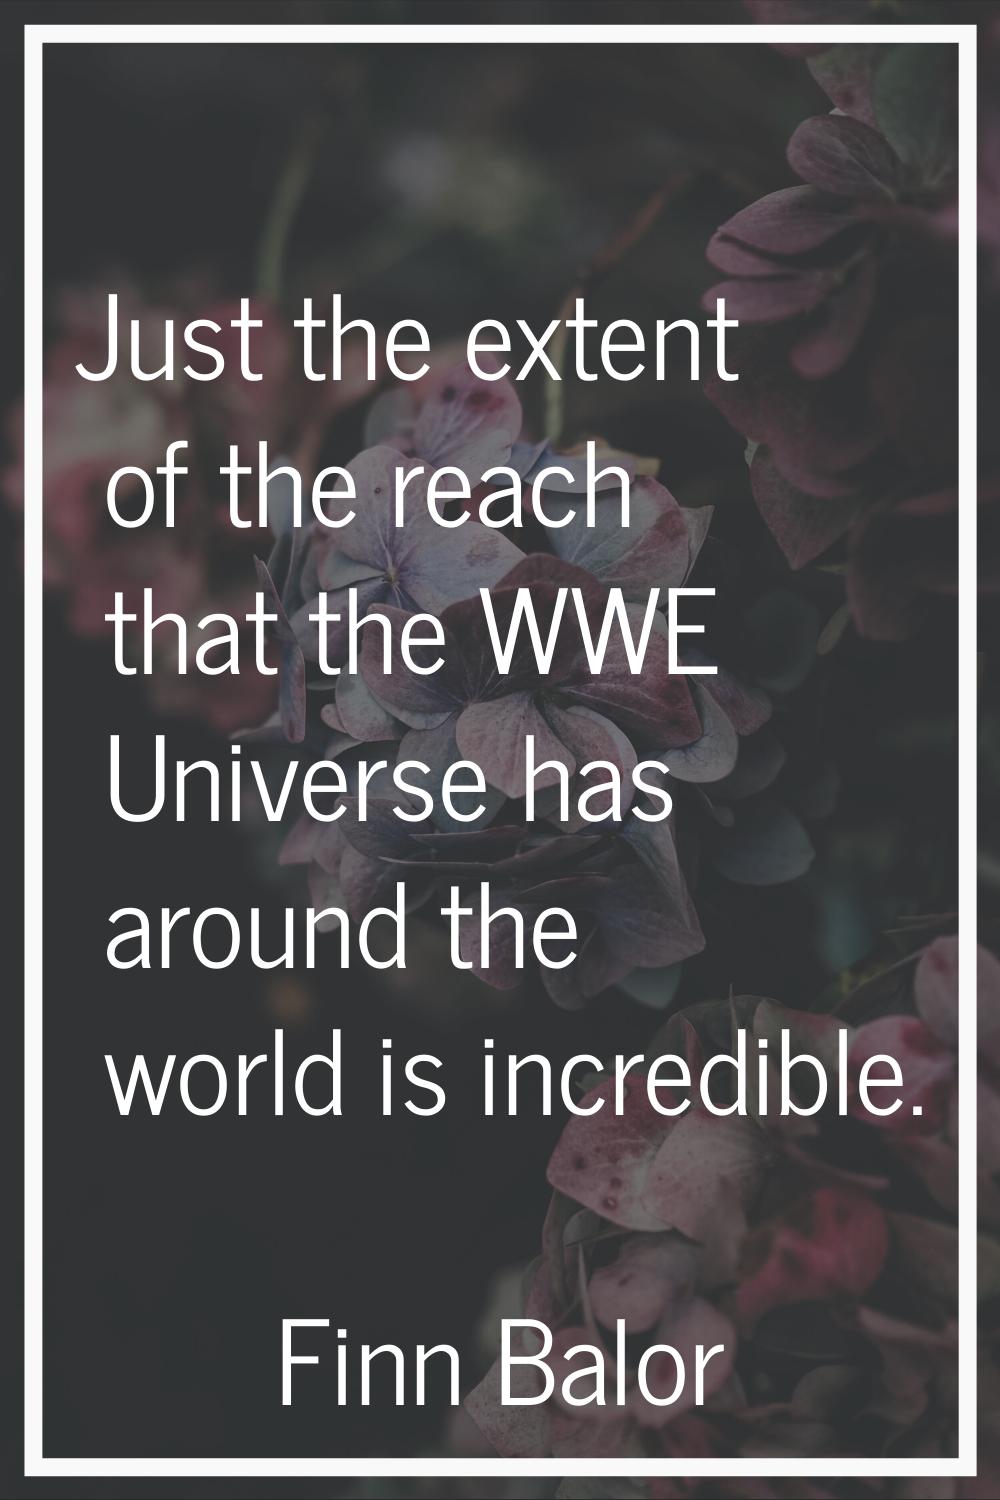 Just the extent of the reach that the WWE Universe has around the world is incredible.